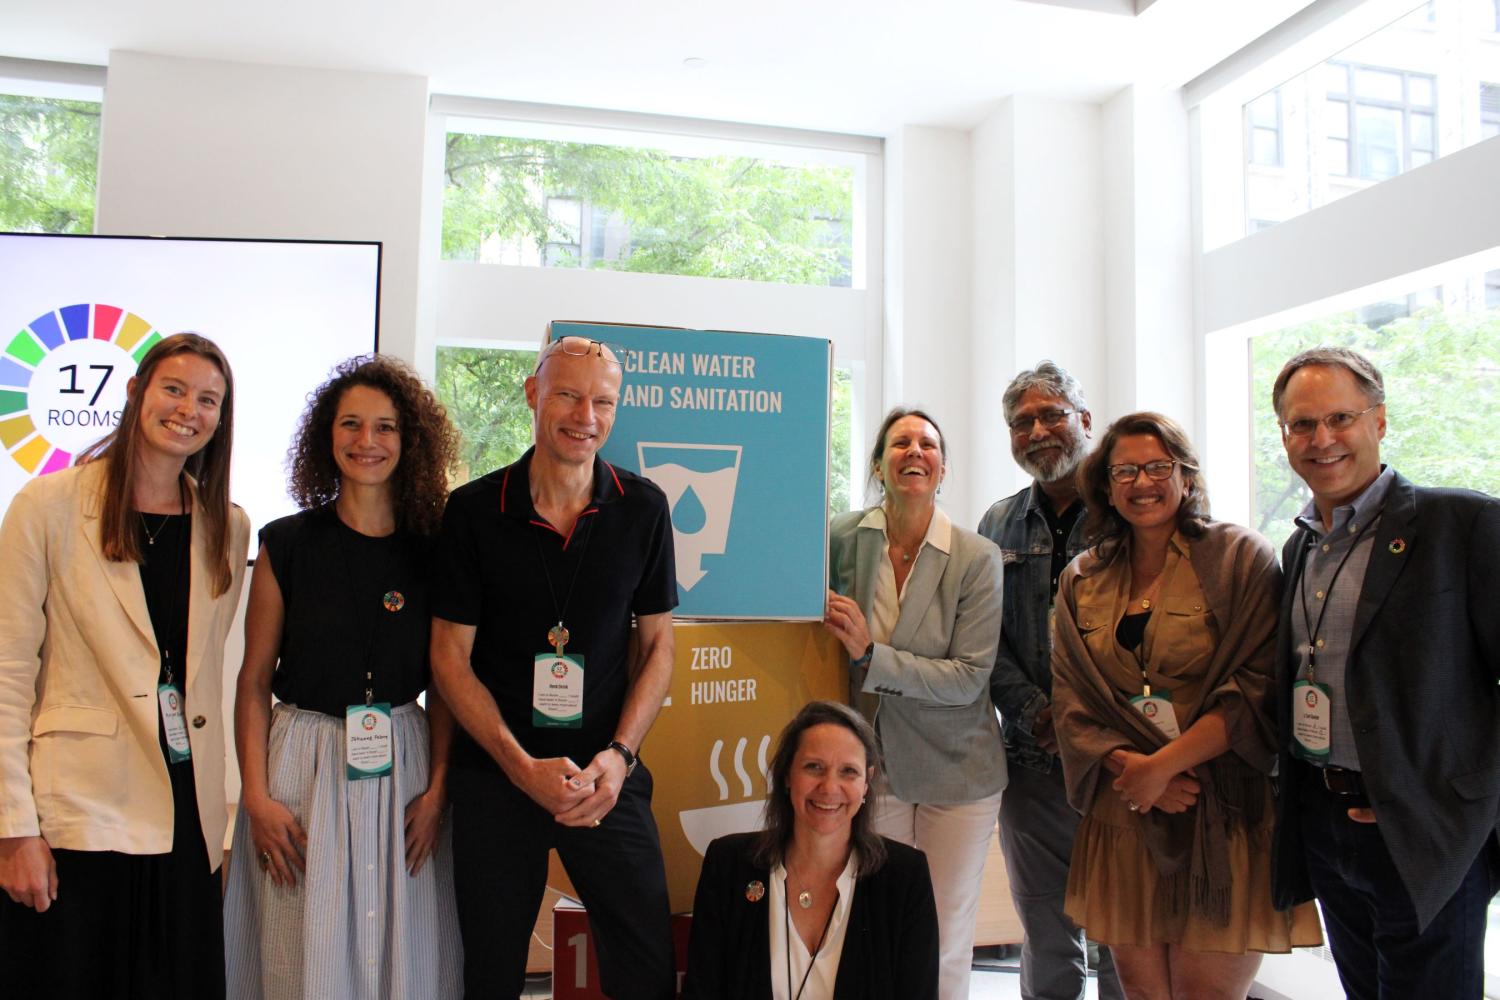 Participants in Room 6 pose together during the September 2023 17 Rooms community gathering. Featuring (from left to right): Morgan Booher, Jehanne Fabre, Henk Ovink, Danielle Gaillard-Picher, Kelly Ann Naylor, Sharif Jamil, Tania Strauss, and J. Carl Ganter. Photo by Junjie Ren (The Brookings Institution).